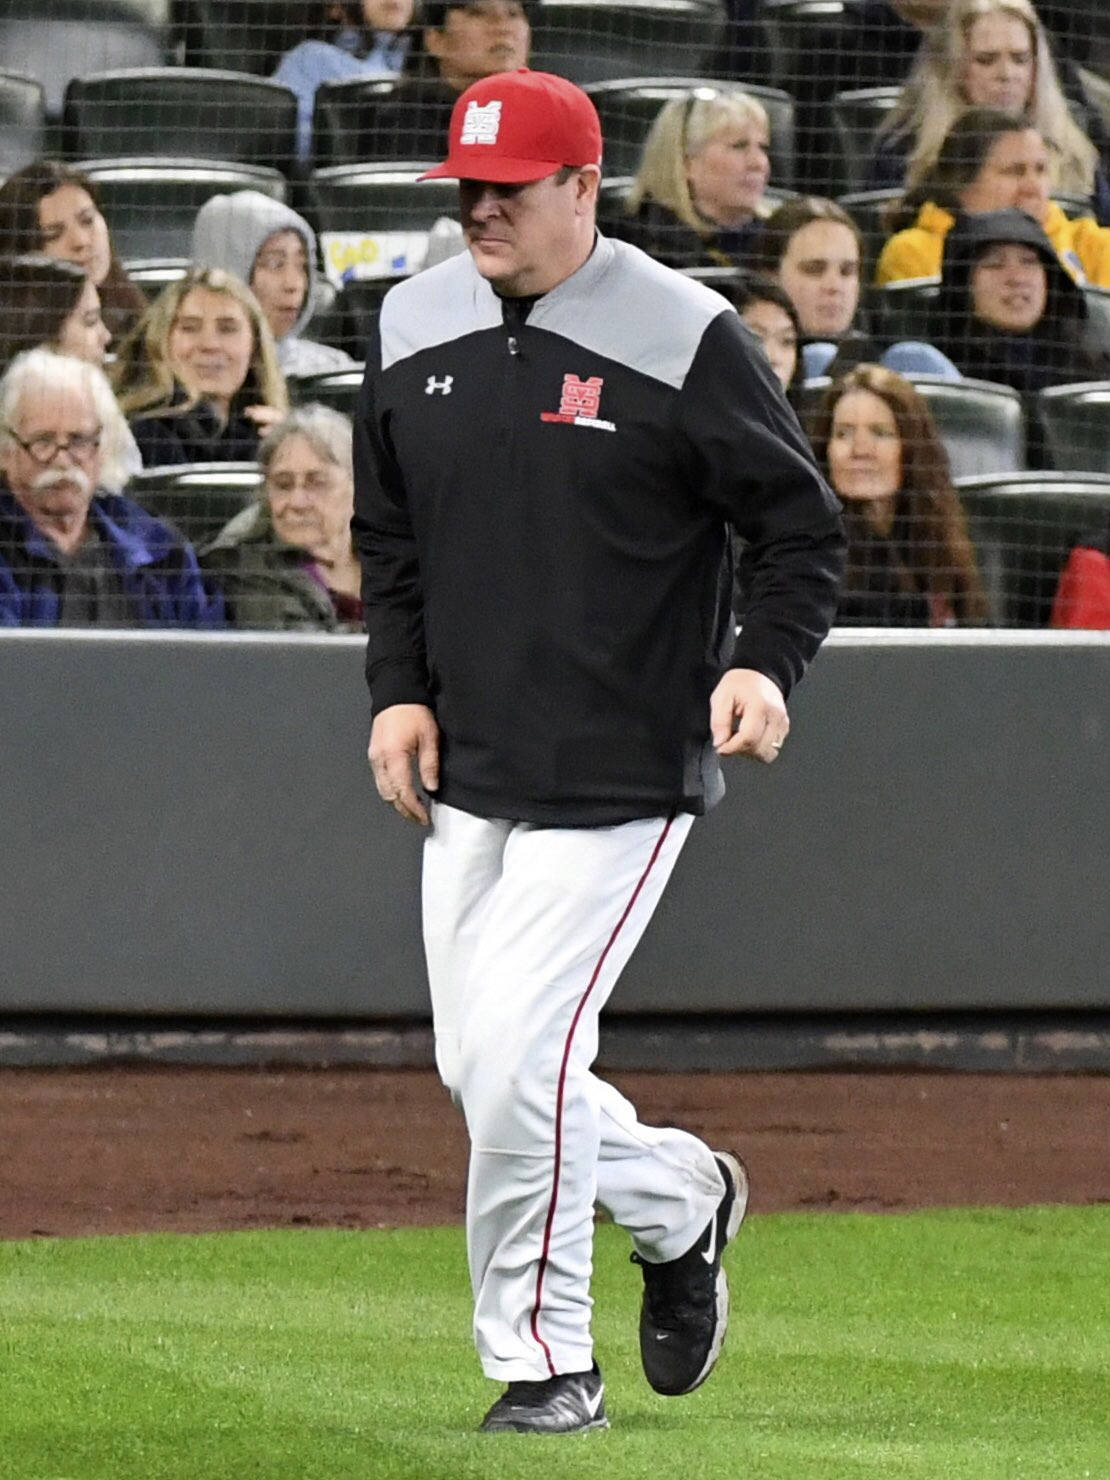 Brent Lutz (pictured) is the new head coach of the Mount Si Wildcats baseball program. Photo courtesy of Mount Si Baseball